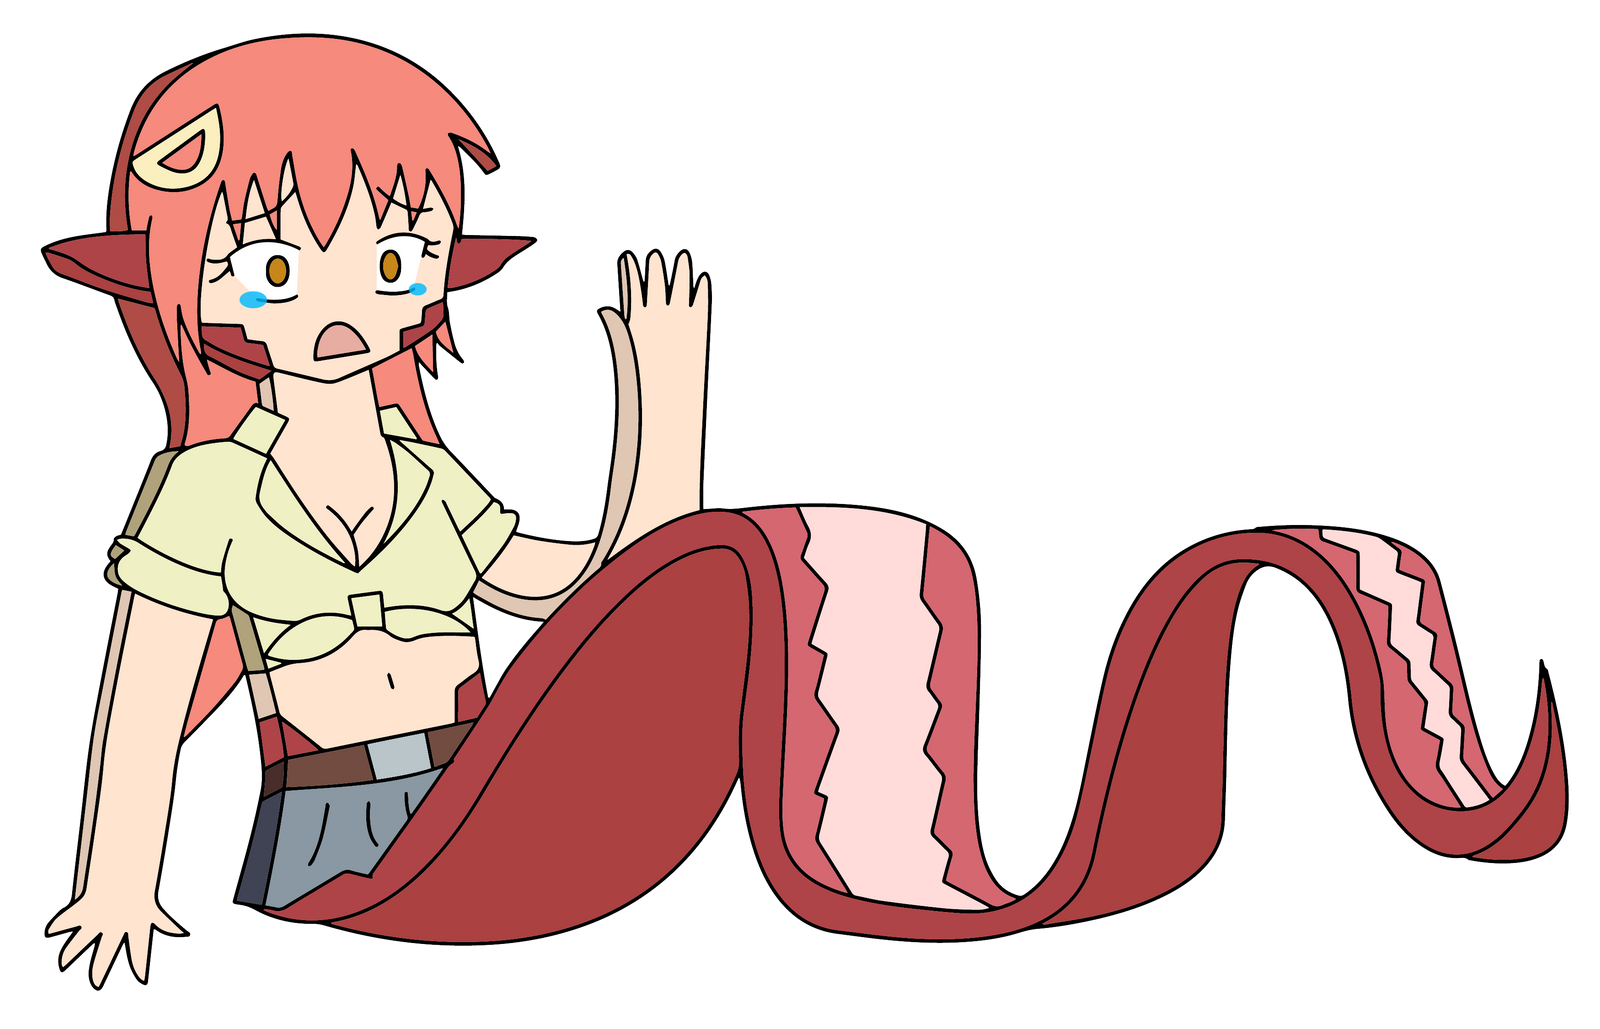 Flattened Miia By Yanows03 On Deviantart Images, Photos, Reviews